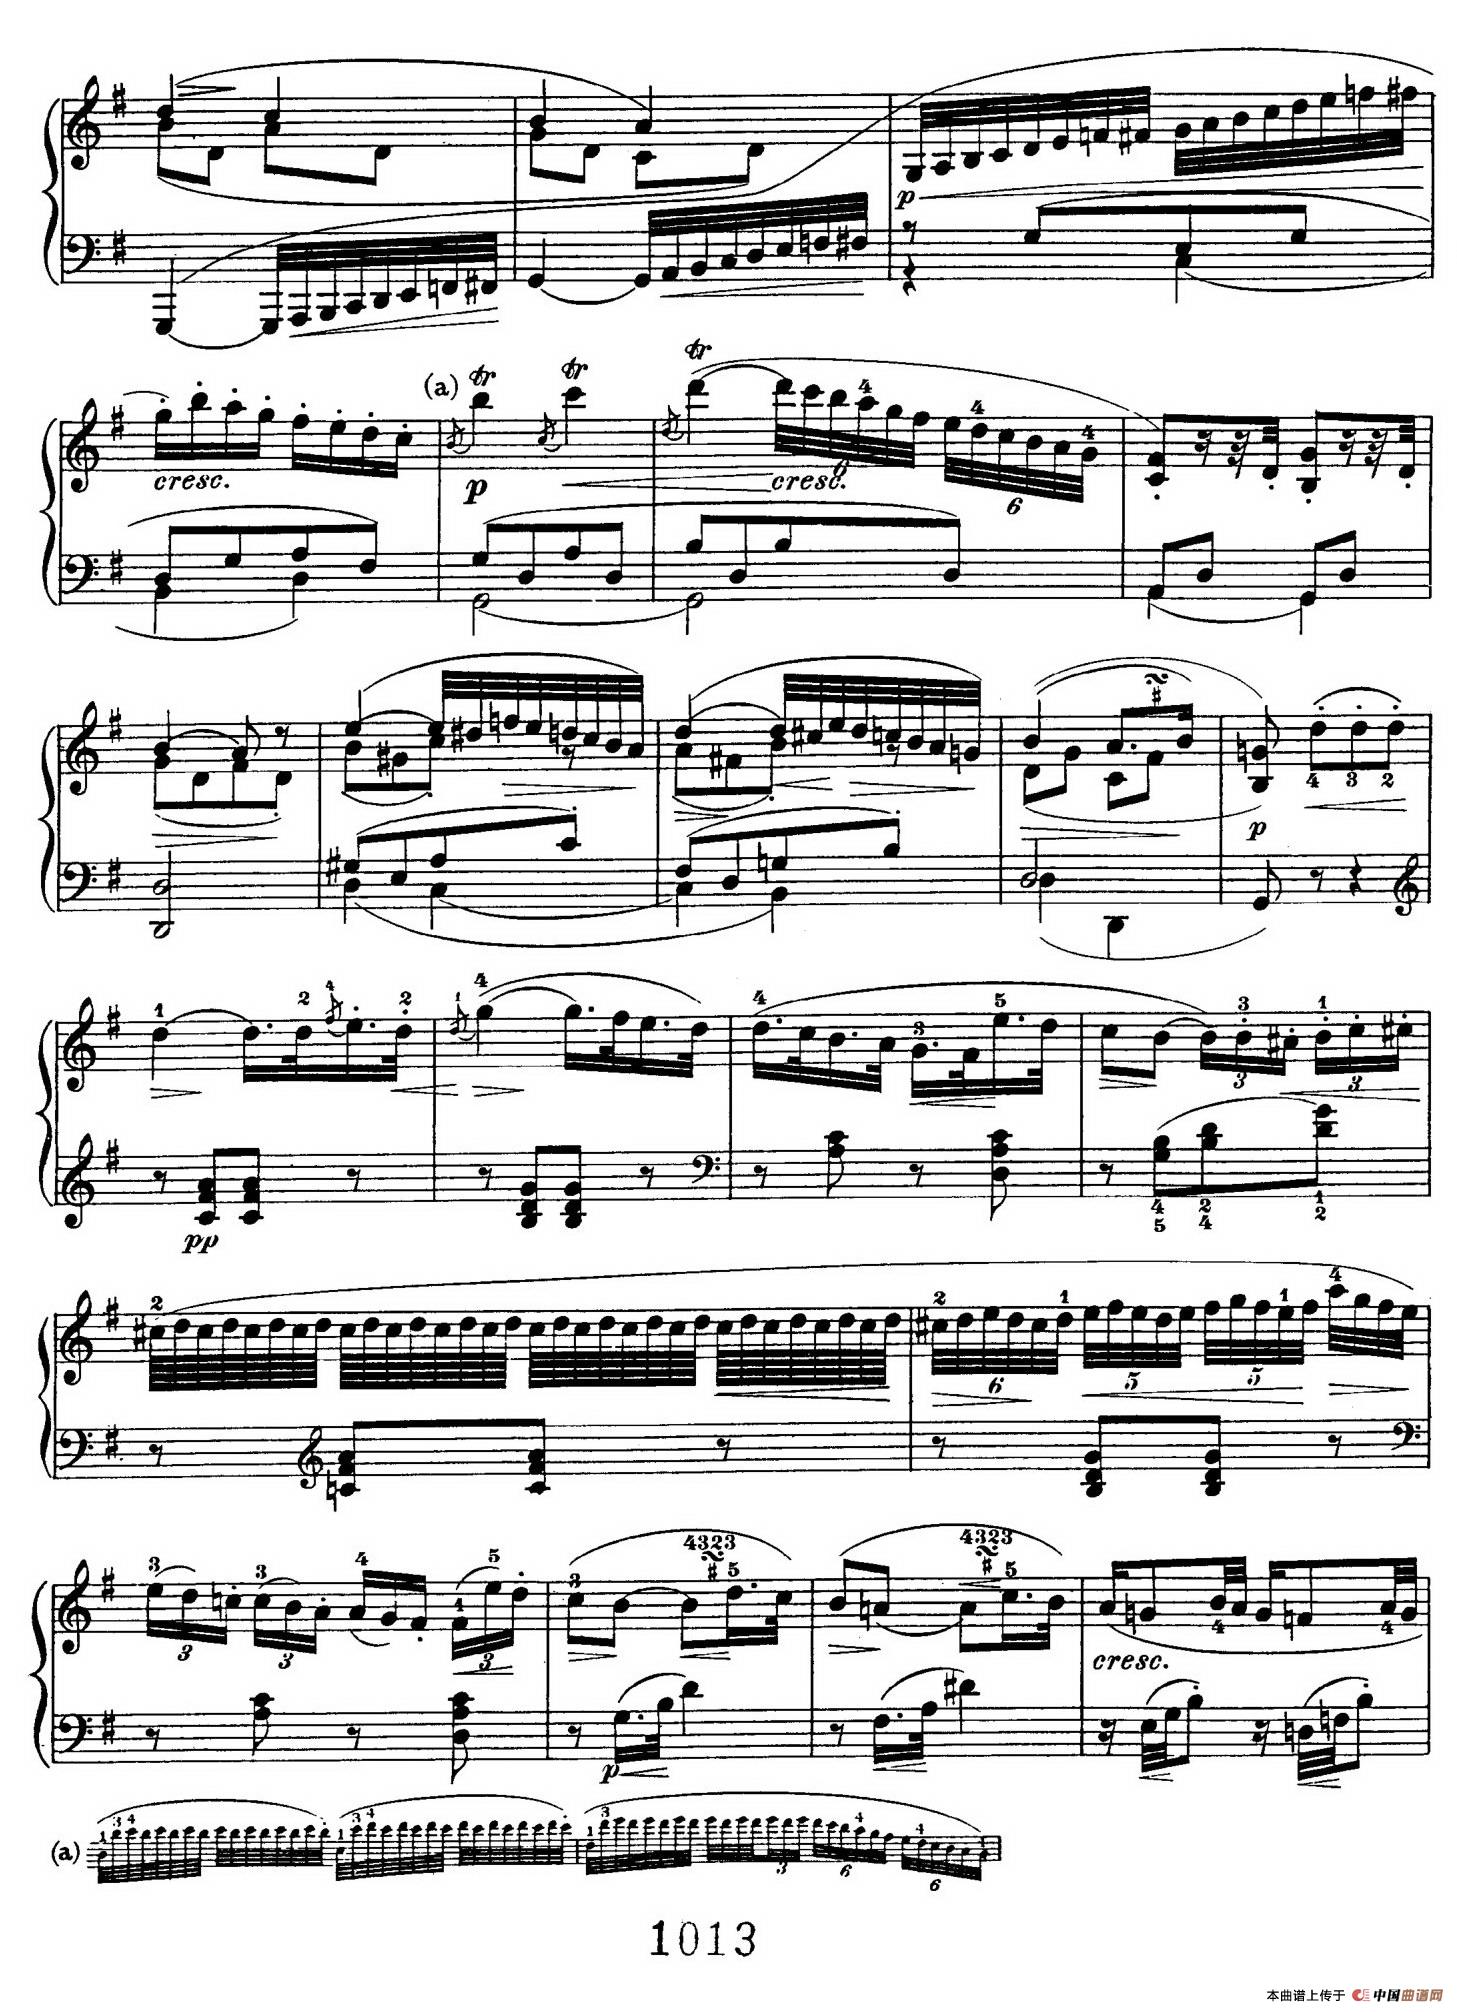 Two Rondos Op.51 No.1（2首回旋曲·2、G大调）